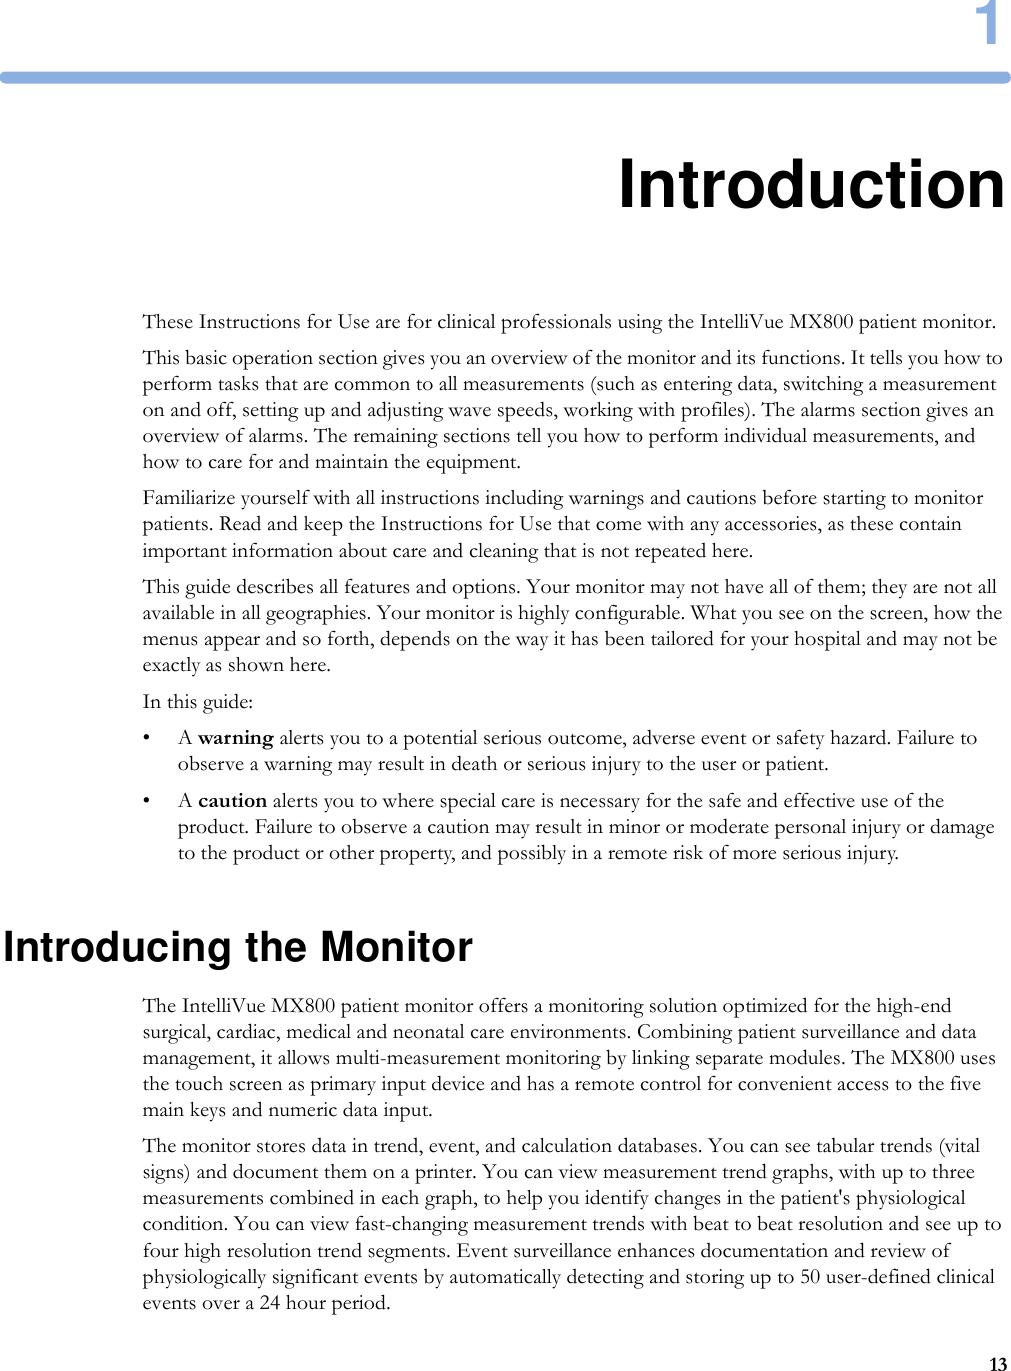 1131IntroductionThese Instructions for Use are for clinical professionals using the IntelliVue MX800 patient monitor.This basic operation section gives you an overview of the monitor and its functions. It tells you how to perform tasks that are common to all measurements (such as entering data, switching a measurement on and off, setting up and adjusting wave speeds, working with profiles). The alarms section gives an overview of alarms. The remaining sections tell you how to perform individual measurements, and how to care for and maintain the equipment.Familiarize yourself with all instructions including warnings and cautions before starting to monitor patients. Read and keep the Instructions for Use that come with any accessories, as these contain important information about care and cleaning that is not repeated here.This guide describes all features and options. Your monitor may not have all of them; they are not all available in all geographies. Your monitor is highly configurable. What you see on the screen, how the menus appear and so forth, depends on the way it has been tailored for your hospital and may not be exactly as shown here.In this guide:•A warning alerts you to a potential serious outcome, adverse event or safety hazard. Failure to observe a warning may result in death or serious injury to the user or patient.•A caution alerts you to where special care is necessary for the safe and effective use of the product. Failure to observe a caution may result in minor or moderate personal injury or damage to the product or other property, and possibly in a remote risk of more serious injury.Introducing the MonitorThe IntelliVue MX800 patient monitor offers a monitoring solution optimized for the high-end surgical, cardiac, medical and neonatal care environments. Combining patient surveillance and data management, it allows multi-measurement monitoring by linking separate modules. The MX800 uses the touch screen as primary input device and has a remote control for convenient access to the five main keys and numeric data input.The monitor stores data in trend, event, and calculation databases. You can see tabular trends (vital signs) and document them on a printer. You can view measurement trend graphs, with up to three measurements combined in each graph, to help you identify changes in the patient&apos;s physiological condition. You can view fast-changing measurement trends with beat to beat resolution and see up to four high resolution trend segments. Event surveillance enhances documentation and review of physiologically significant events by automatically detecting and storing up to 50 user-defined clinical events over a 24 hour period.